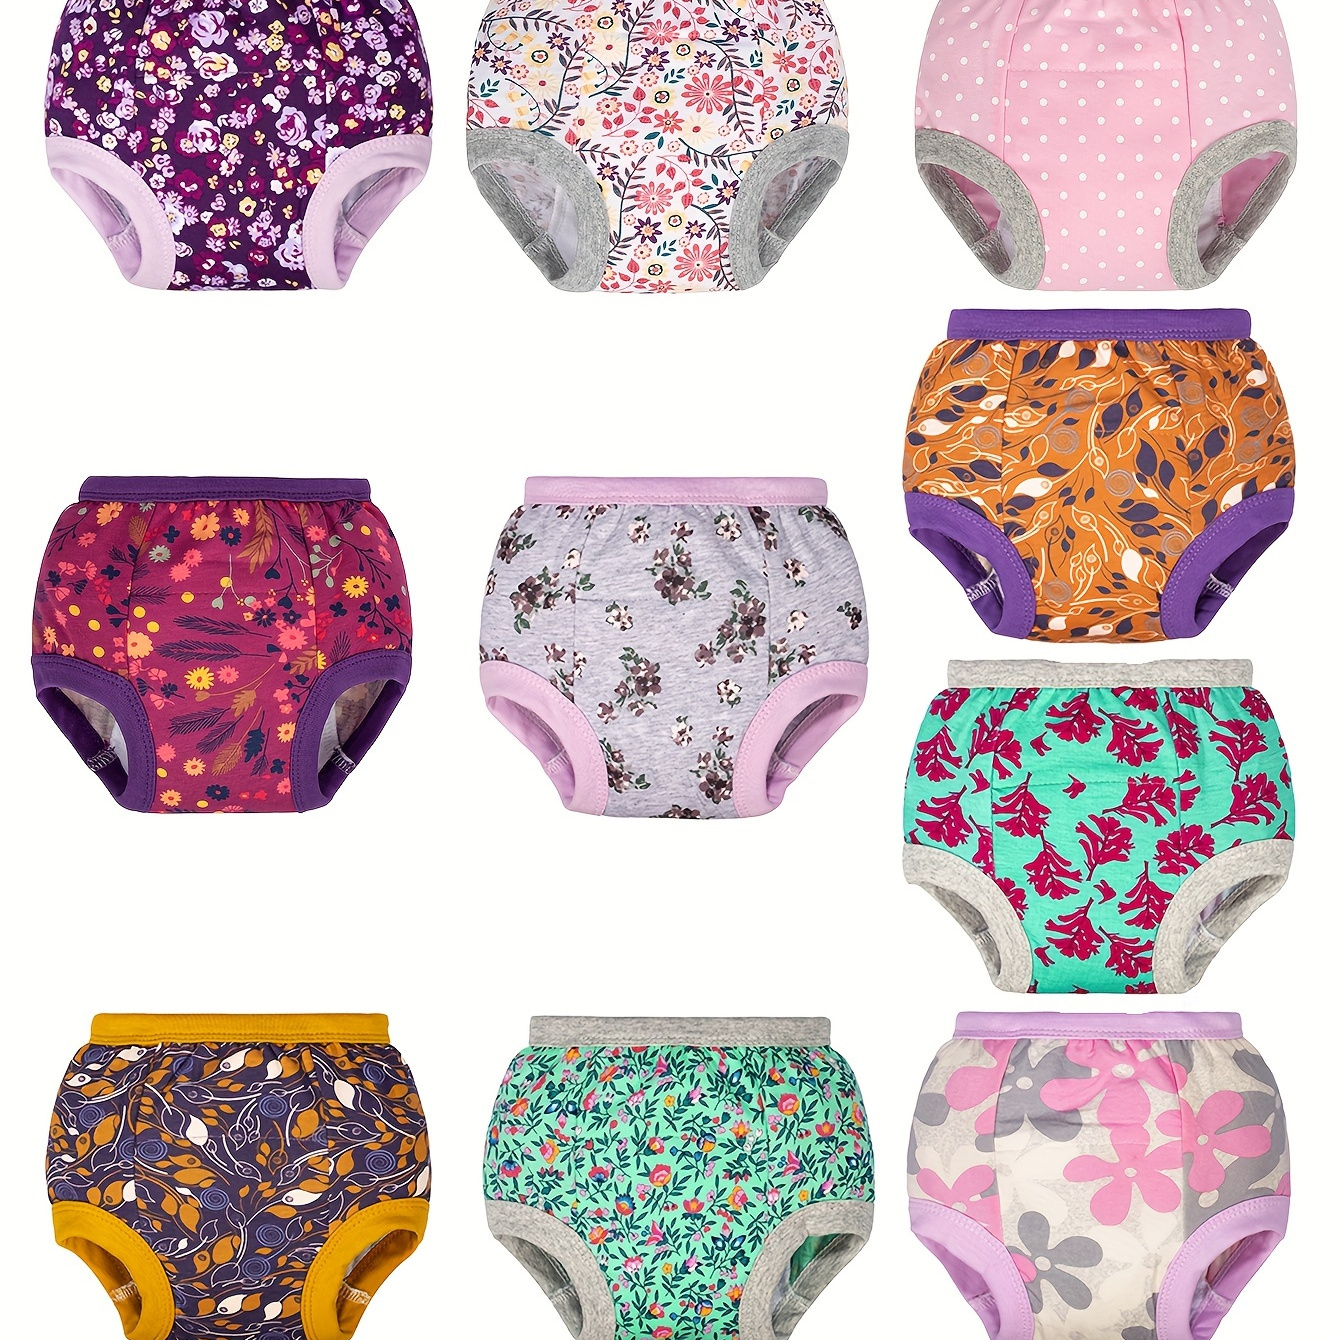 

Potty Training Underwear - 10 Pack, 100% Cotton Absorbent Toddler Pee Pants For Girls